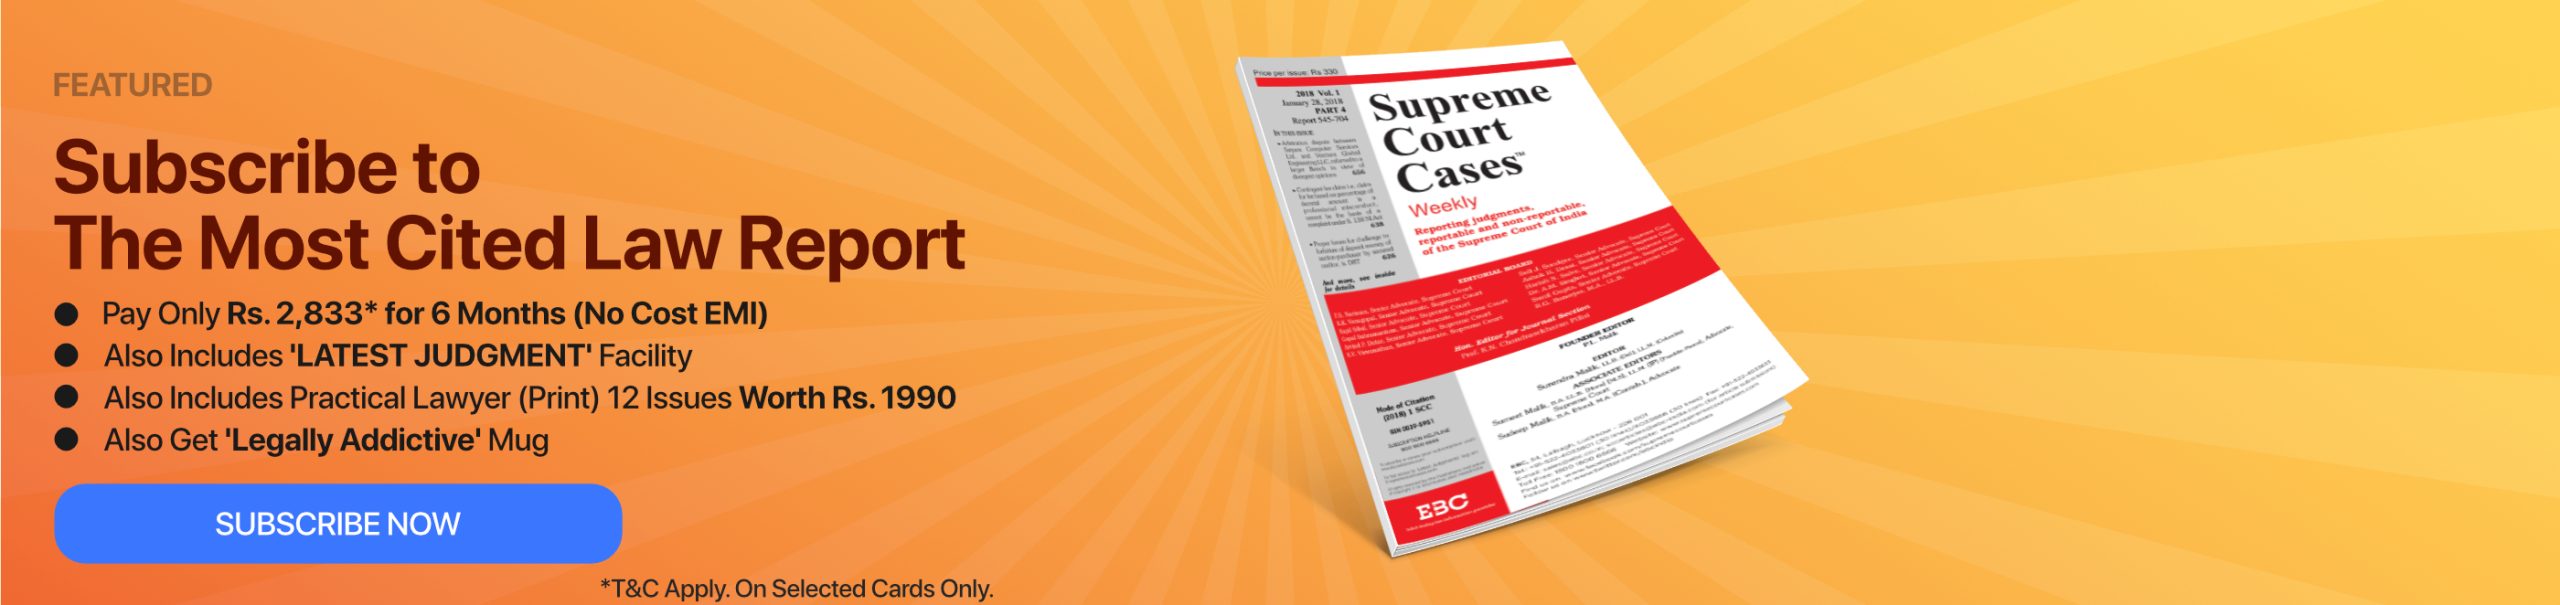 Supreme Court Cases Five Year Subscription